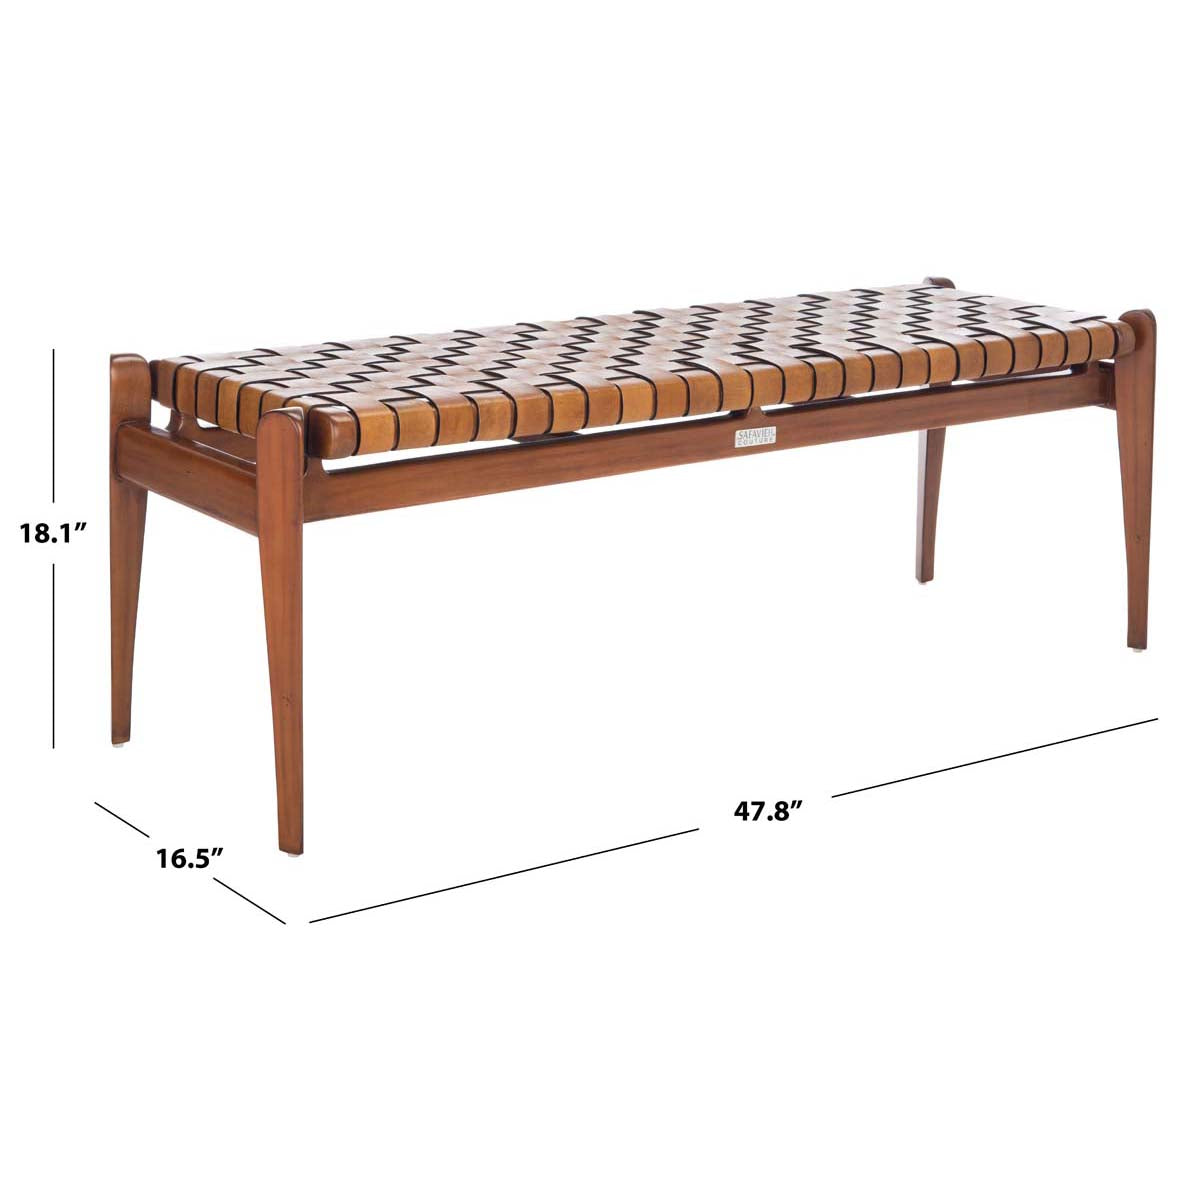 Safavieh Couture Dilan Leather Bench - Brown / Light Brown